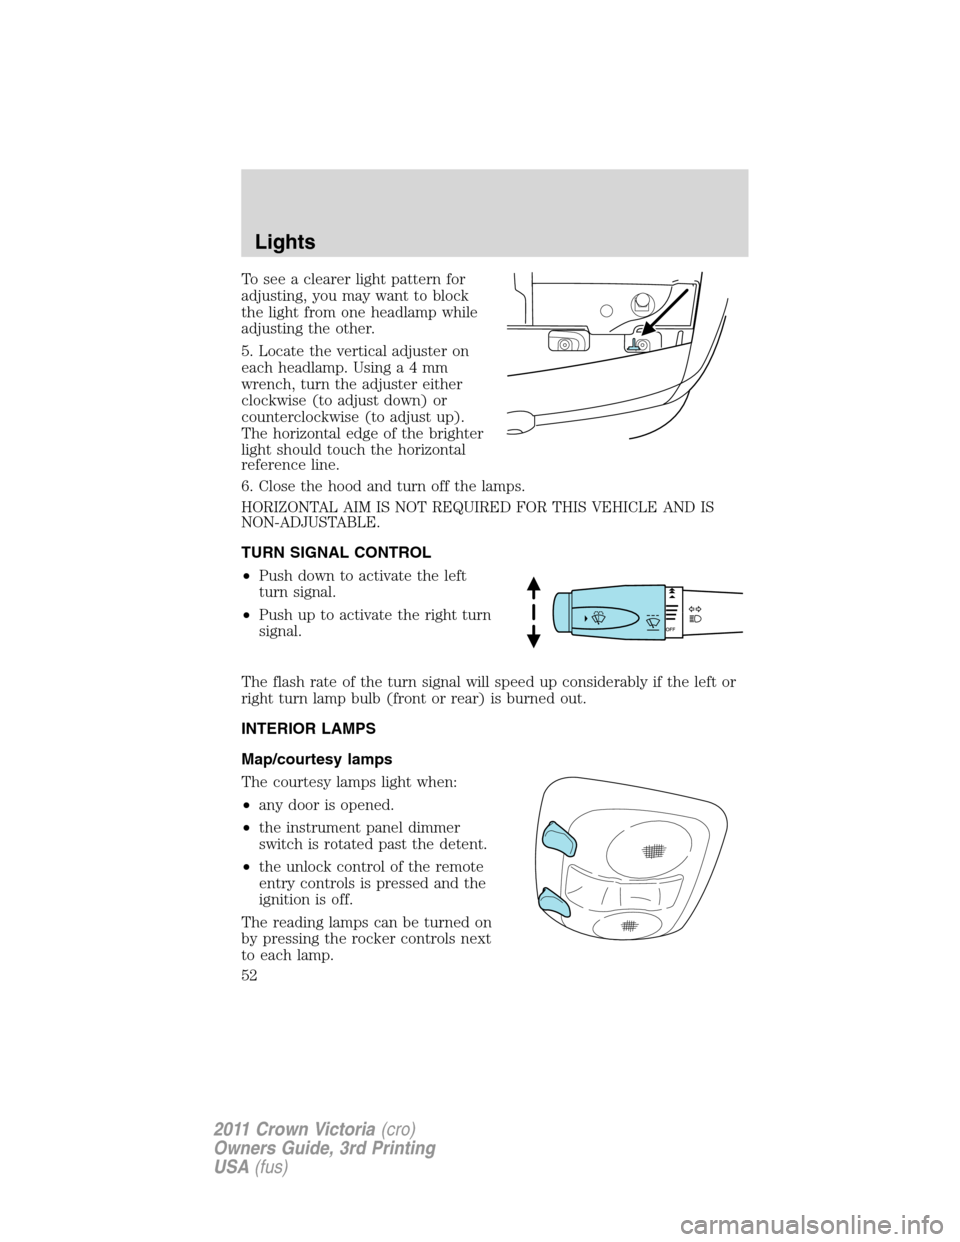 FORD CROWN VICTORIA 2011 2.G Owners Manual To see a clearer light pattern for
adjusting, you may want to block
the light from one headlamp while
adjusting the other.
5. Locate the vertical adjuster on
each headlamp. Usinga4mm
wrench, turn the 